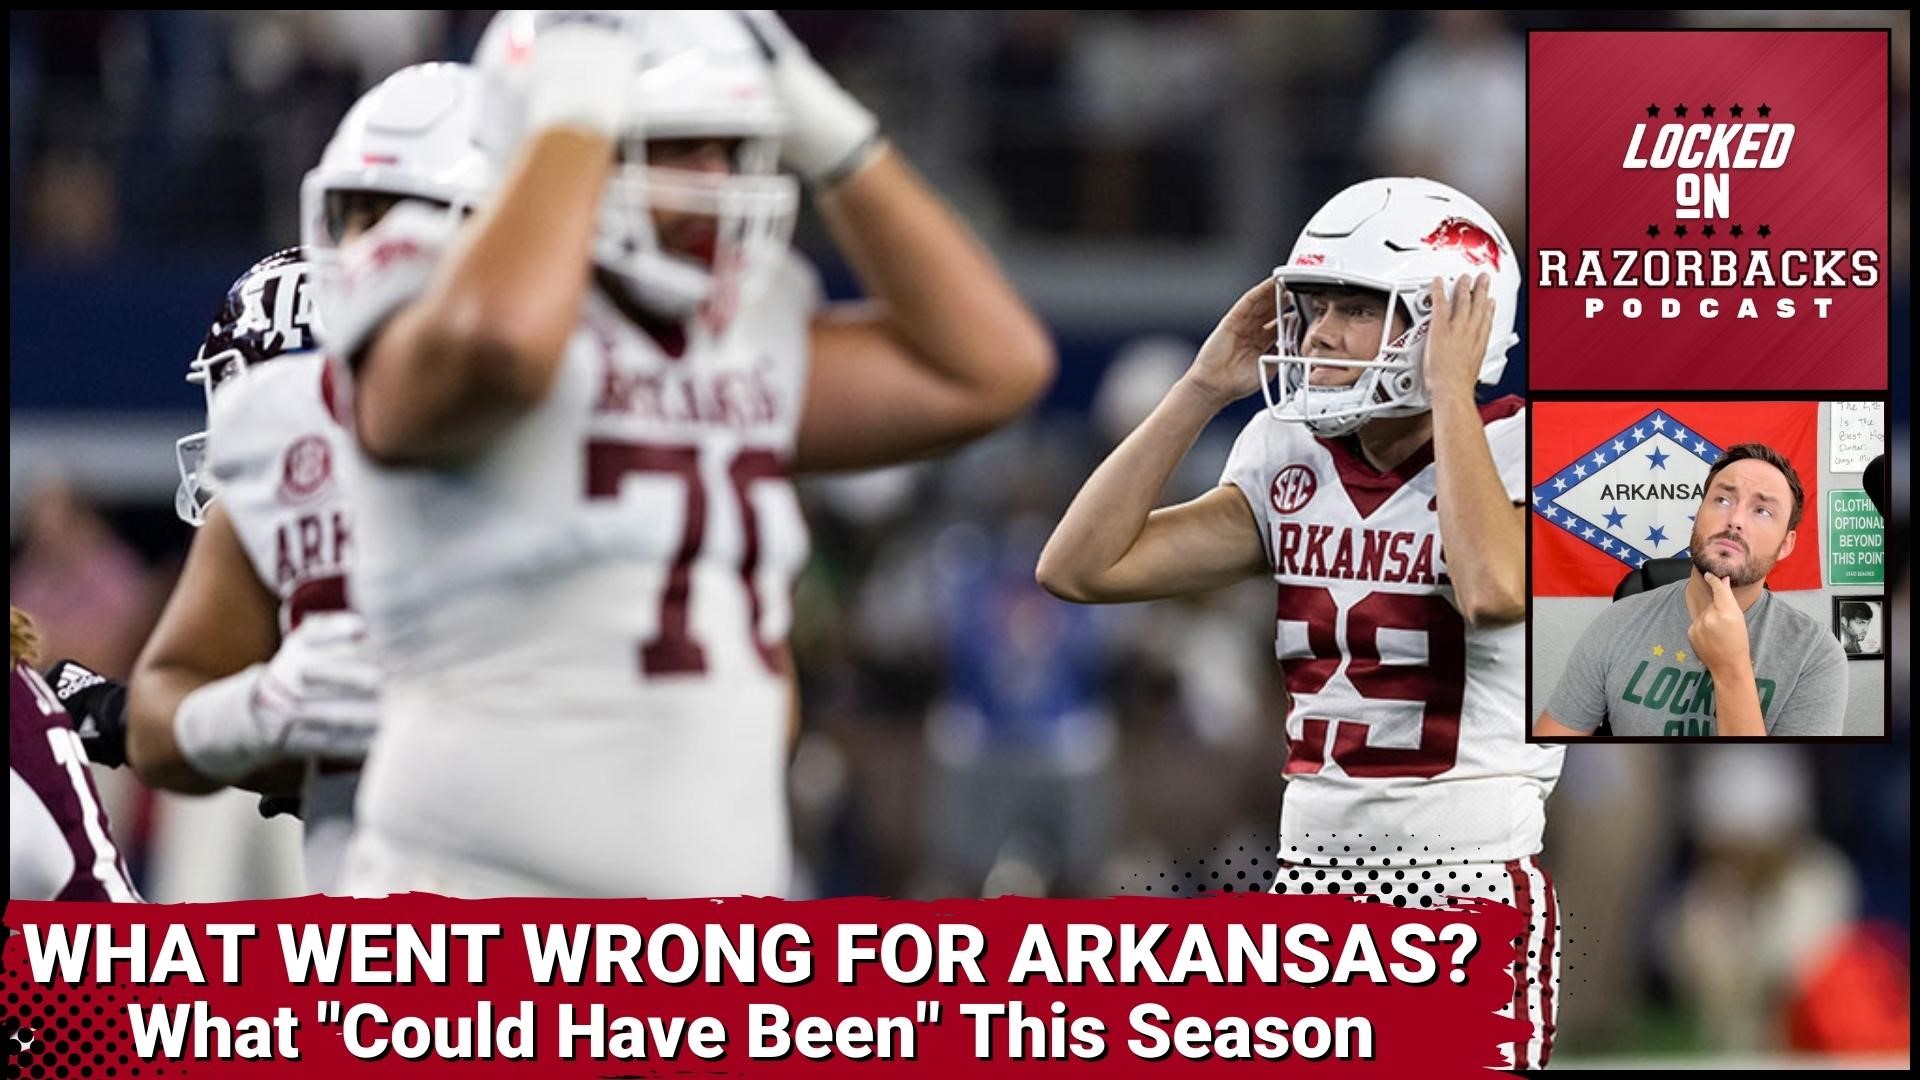 John Nabors looks back on the Razorback Football season in 2022 as to how things went wrong for them in particular games.